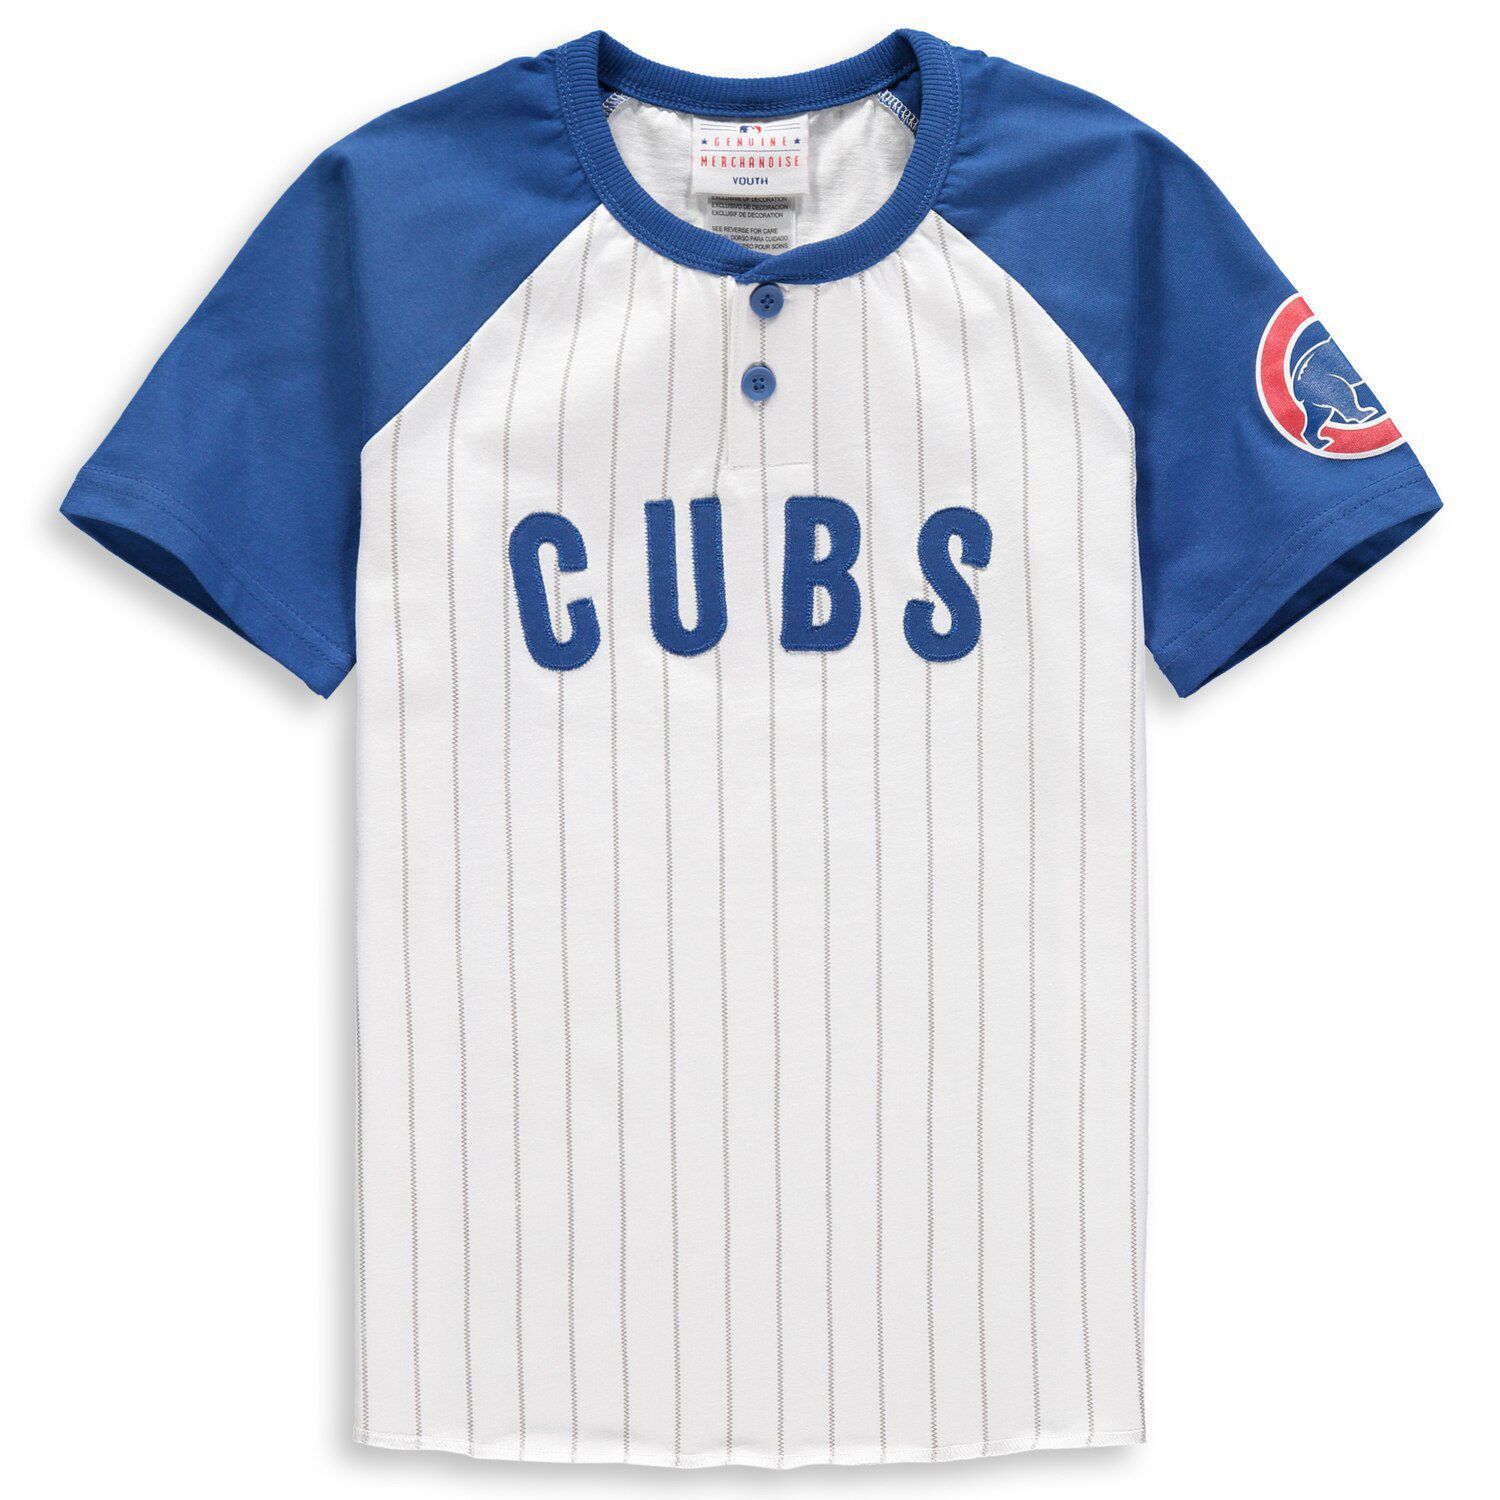 green chicago cubs jersey